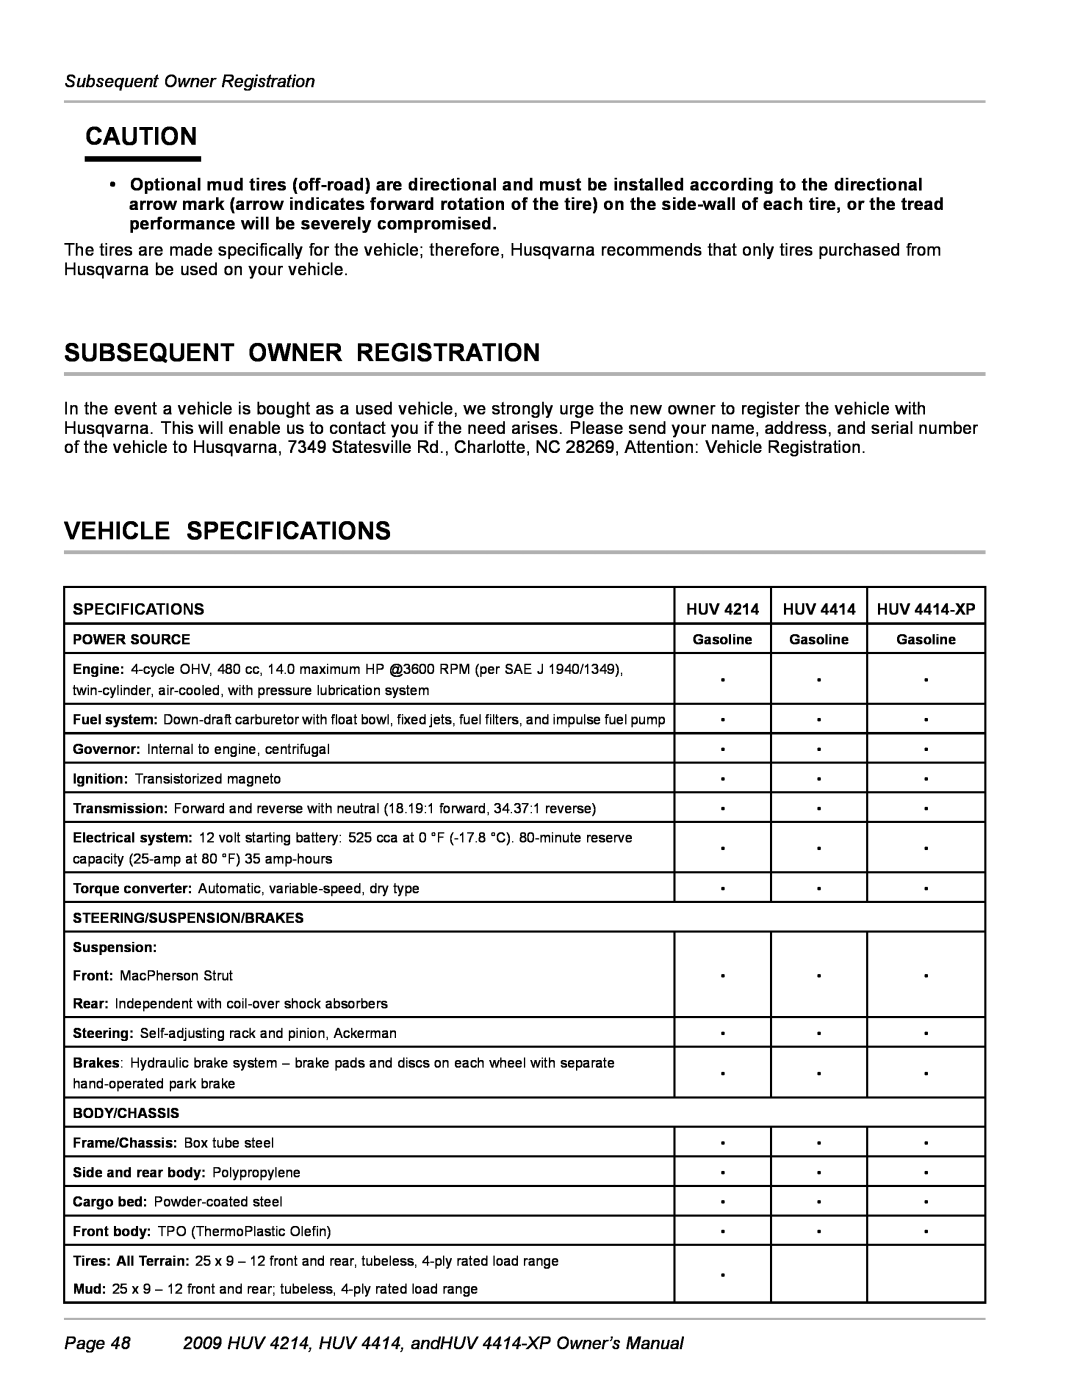 Husqvarna HUV 4414-XP, HUV 4214 owner manual Subsequent Owner Registration, Vehicle Specifications 